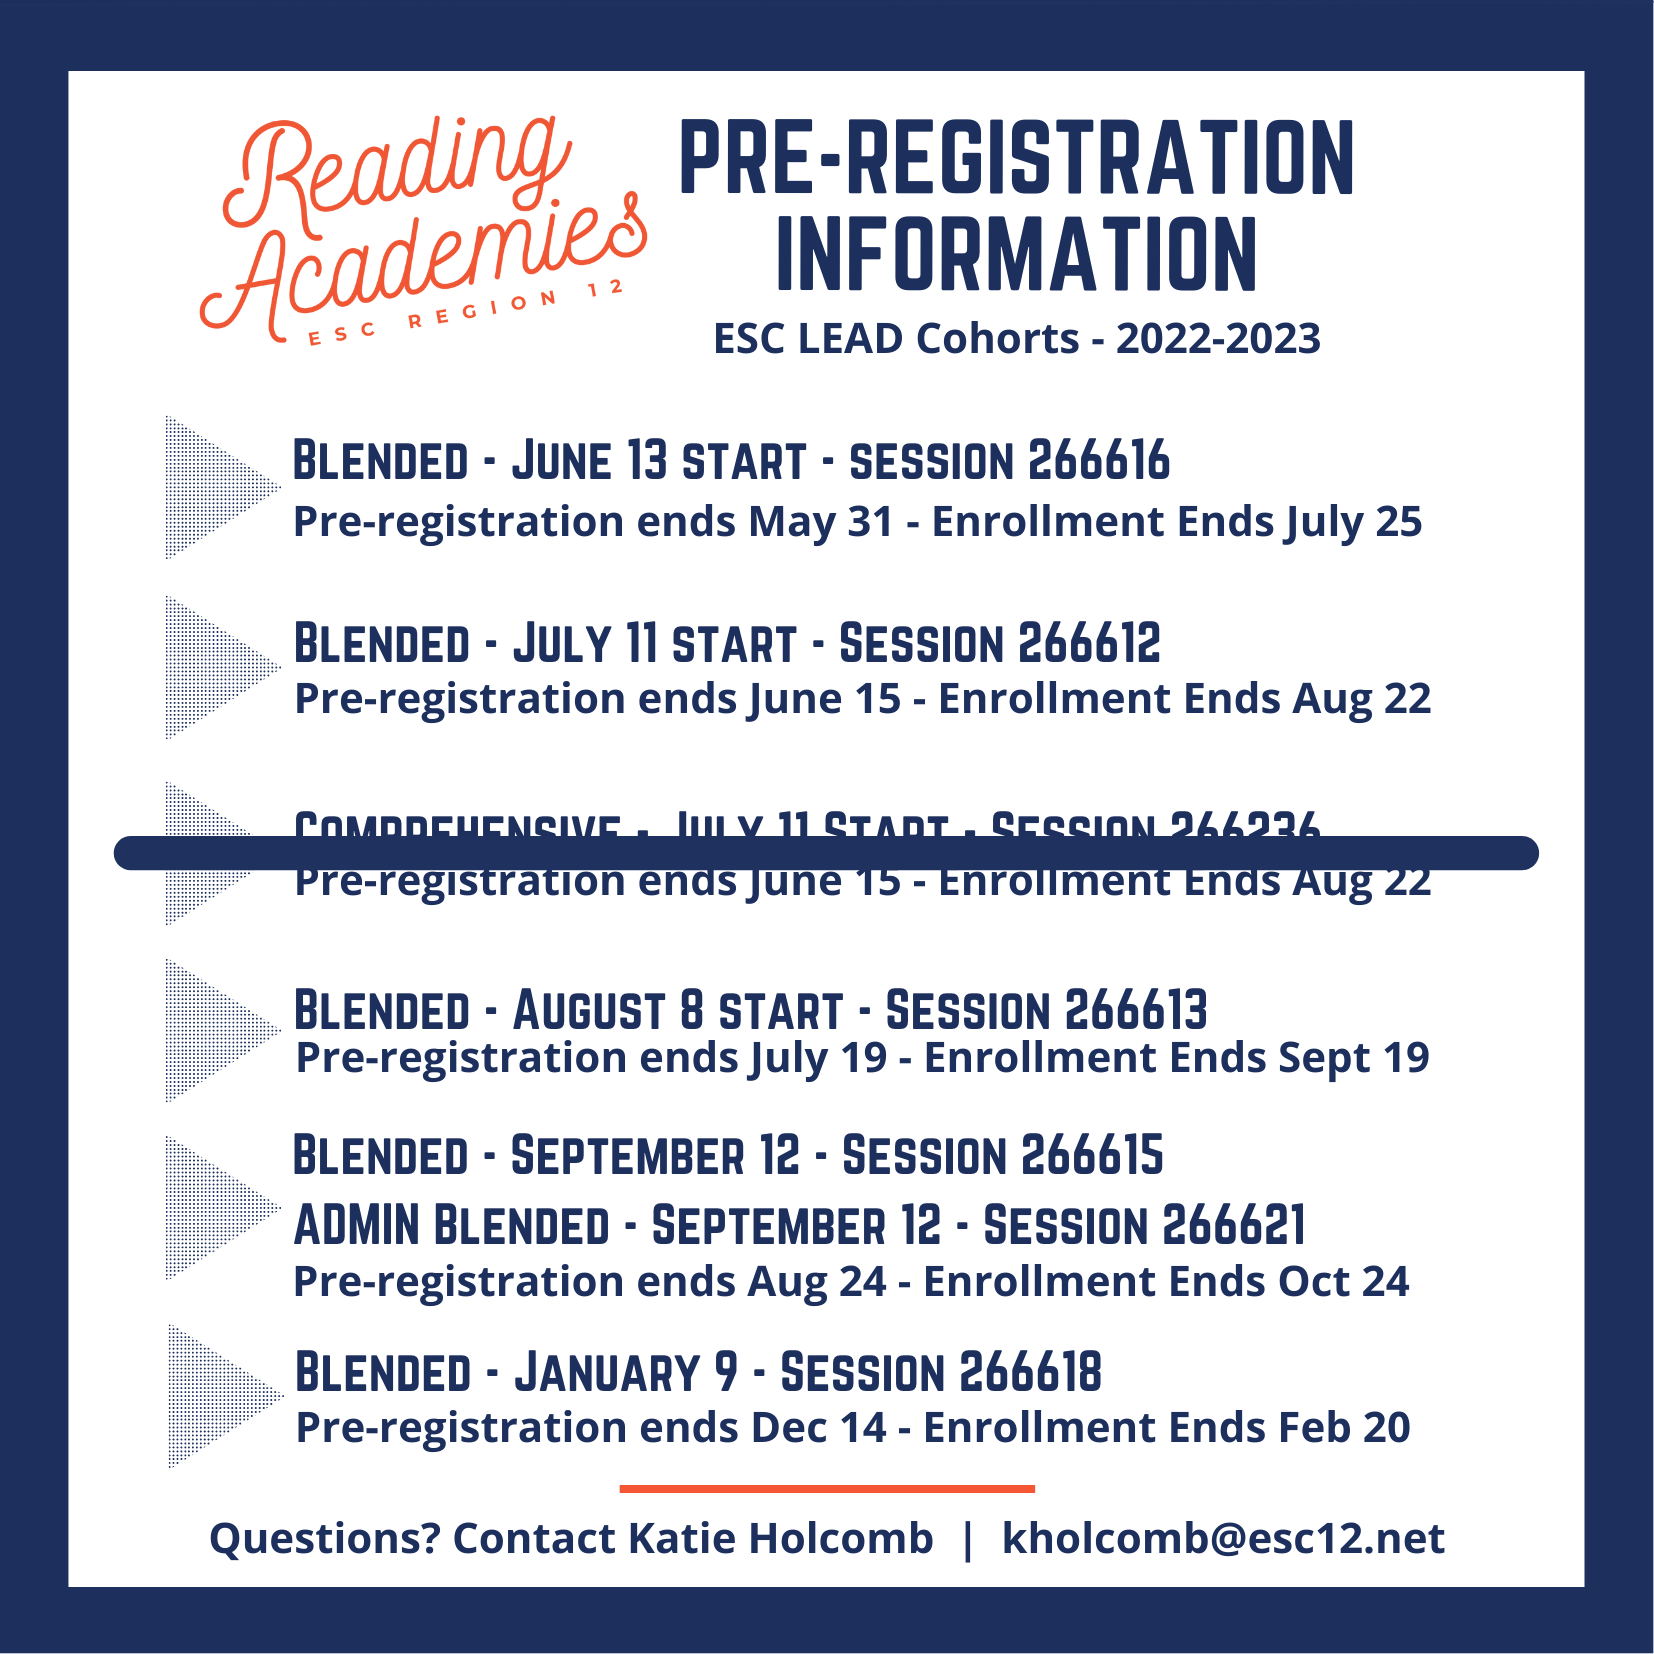 Reading Academy Pre-Registration Sessions